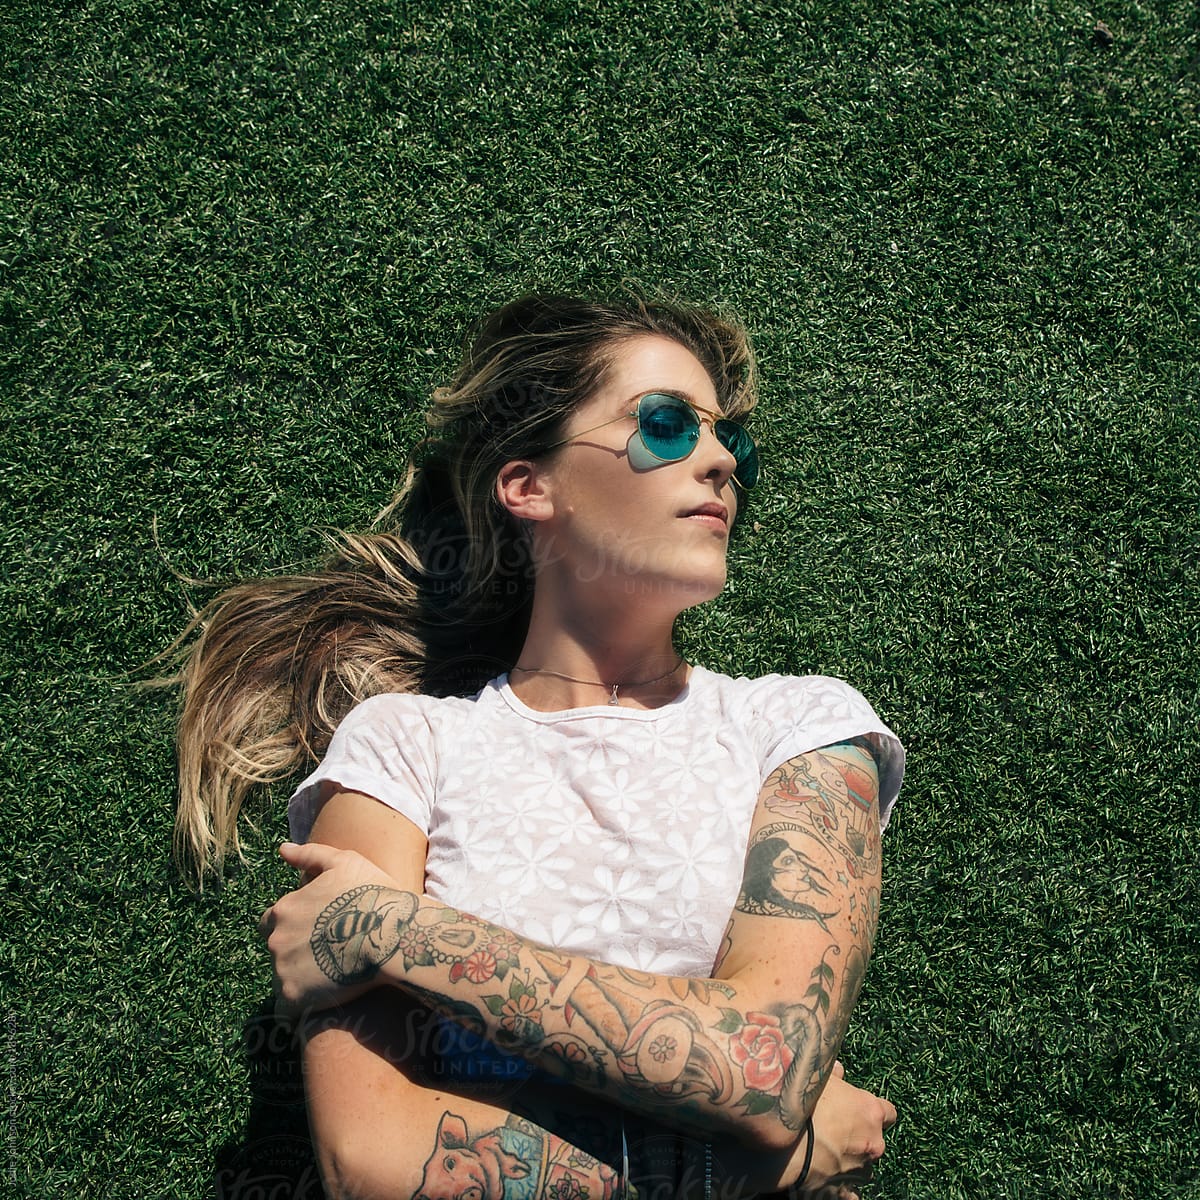 Blonde tattooed woman lying on the grass